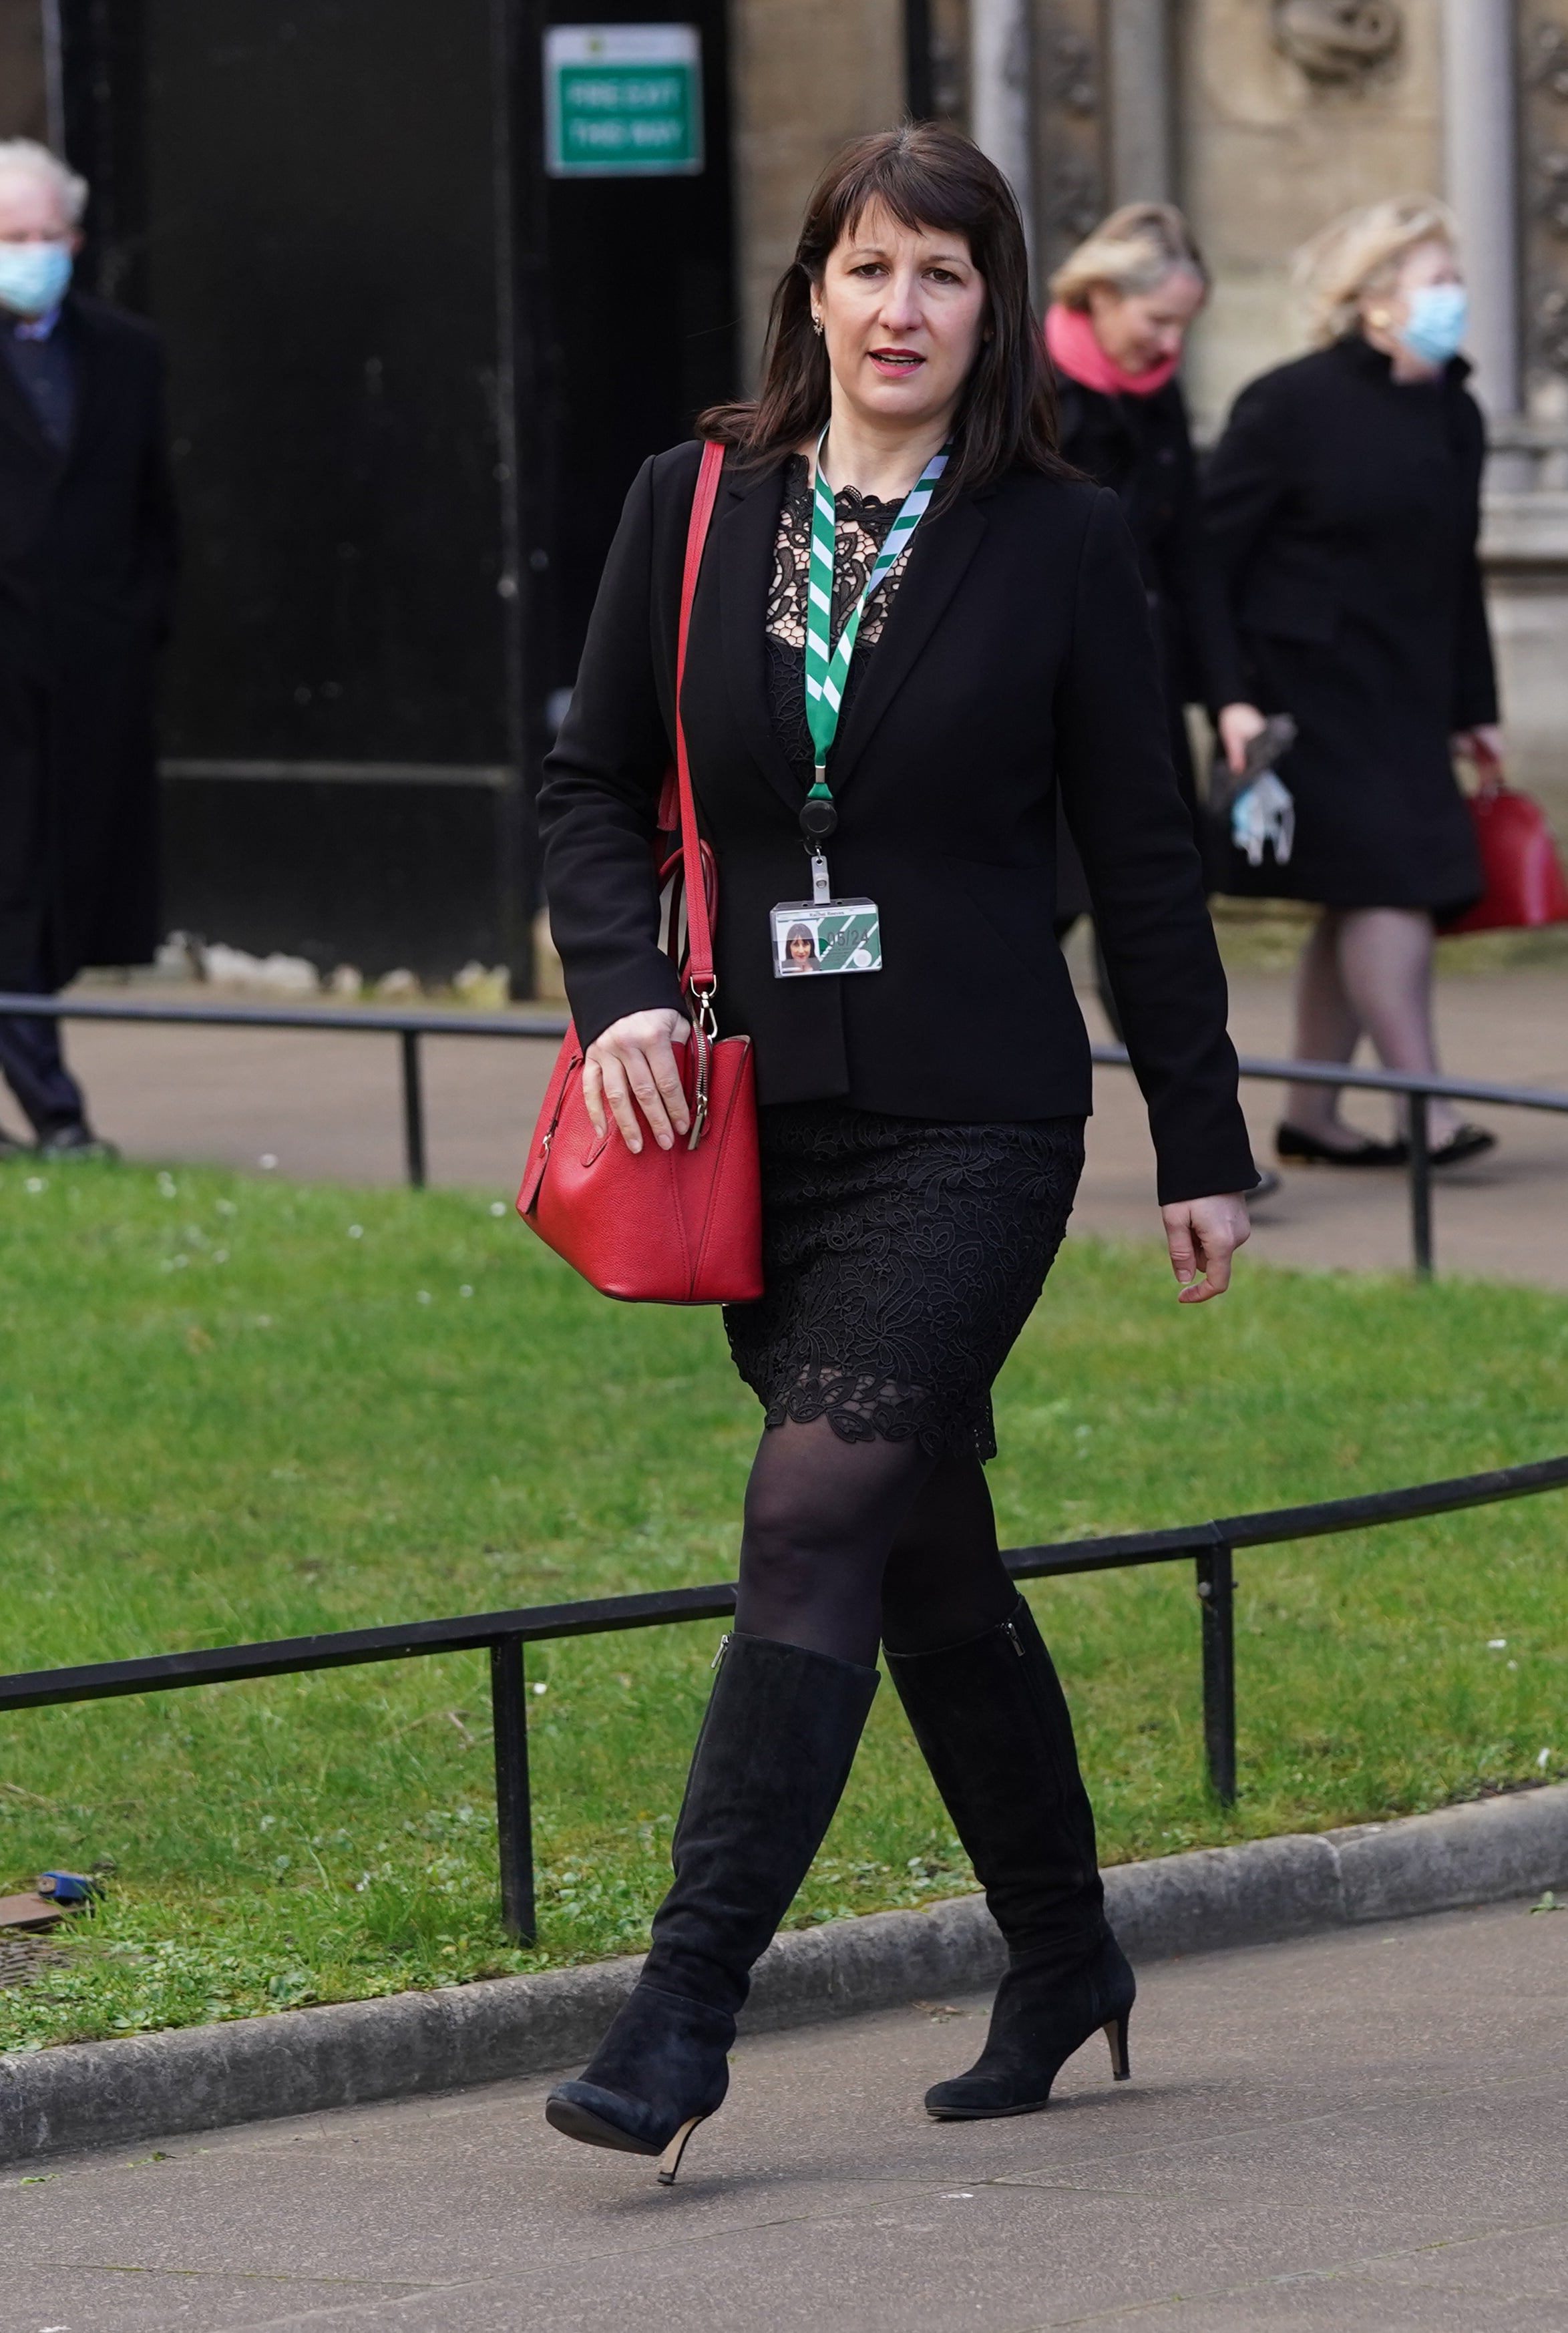 Shadow chancellor Rachel Reeves was among the mourners (Stefan Rousseau/PA)